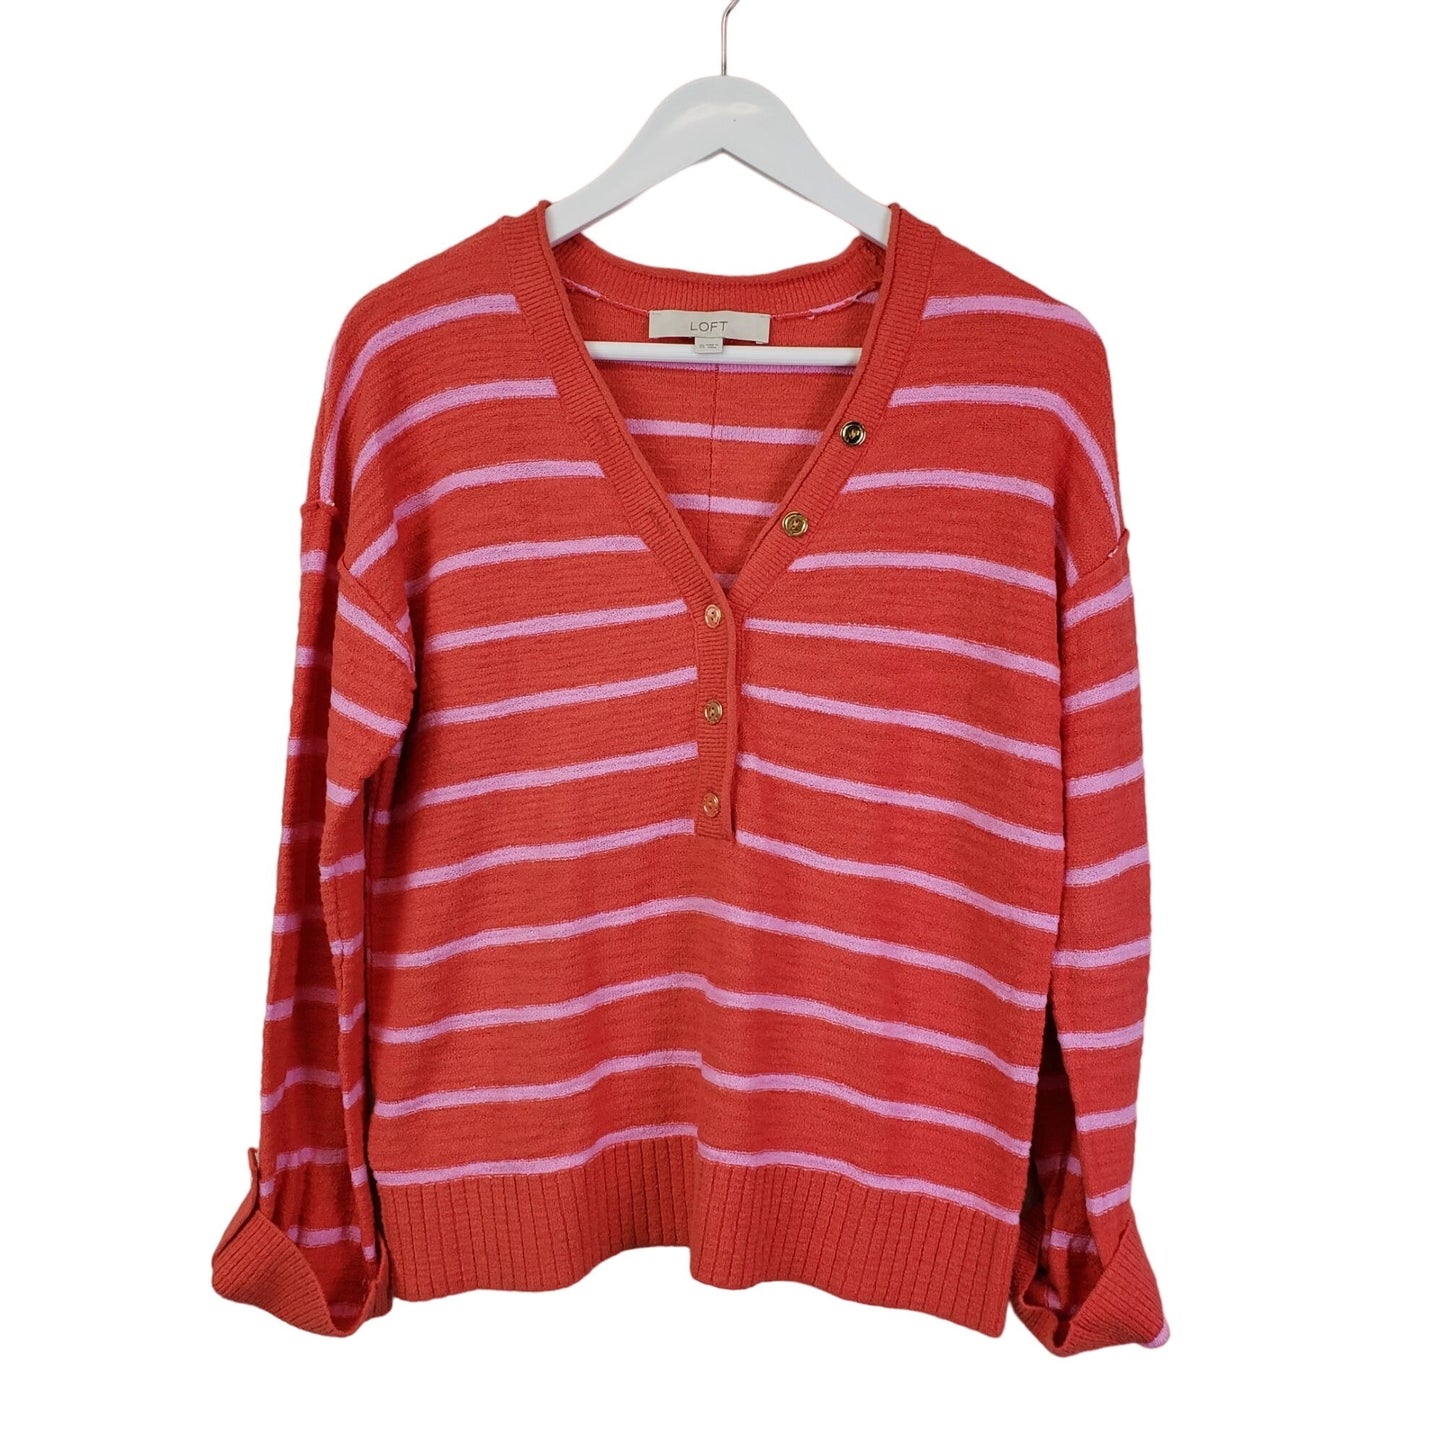 Loft Marled Texture Striped V-Neck Sweater Size XS/S